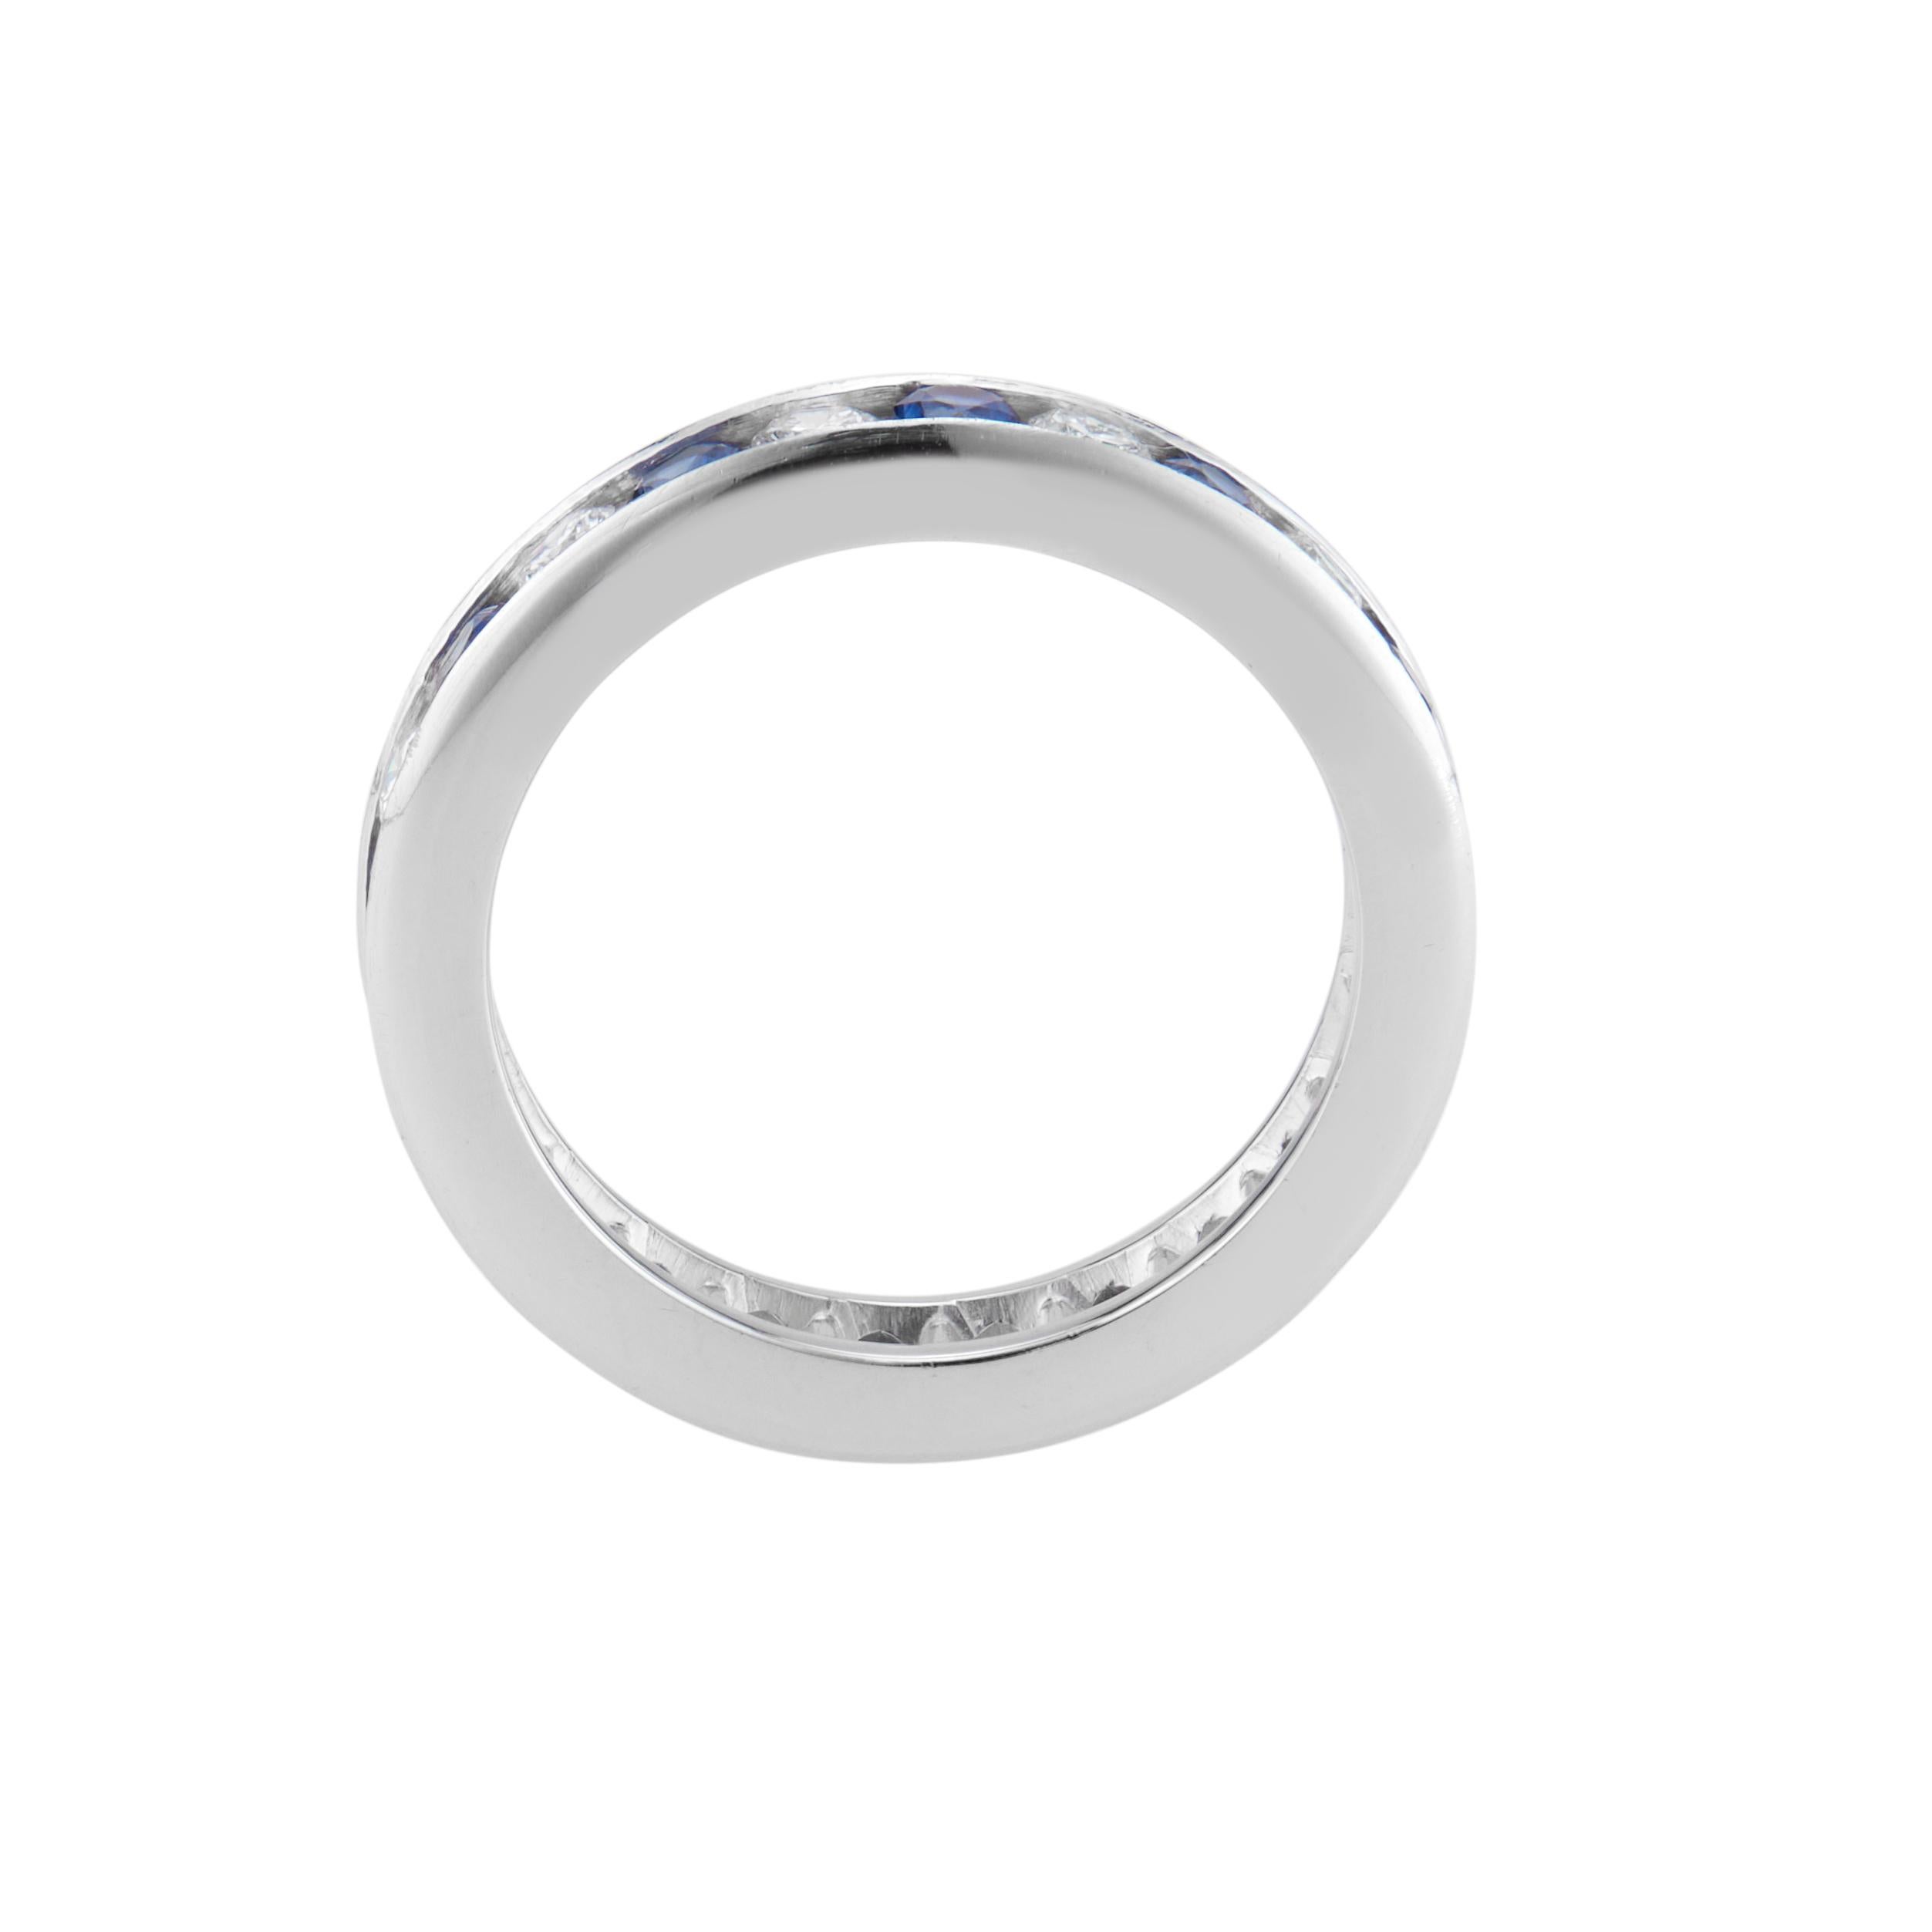 1.42 Carat Sapphire Diamond Platinum Eternity Wedding Band In Excellent Condition For Sale In Stamford, CT